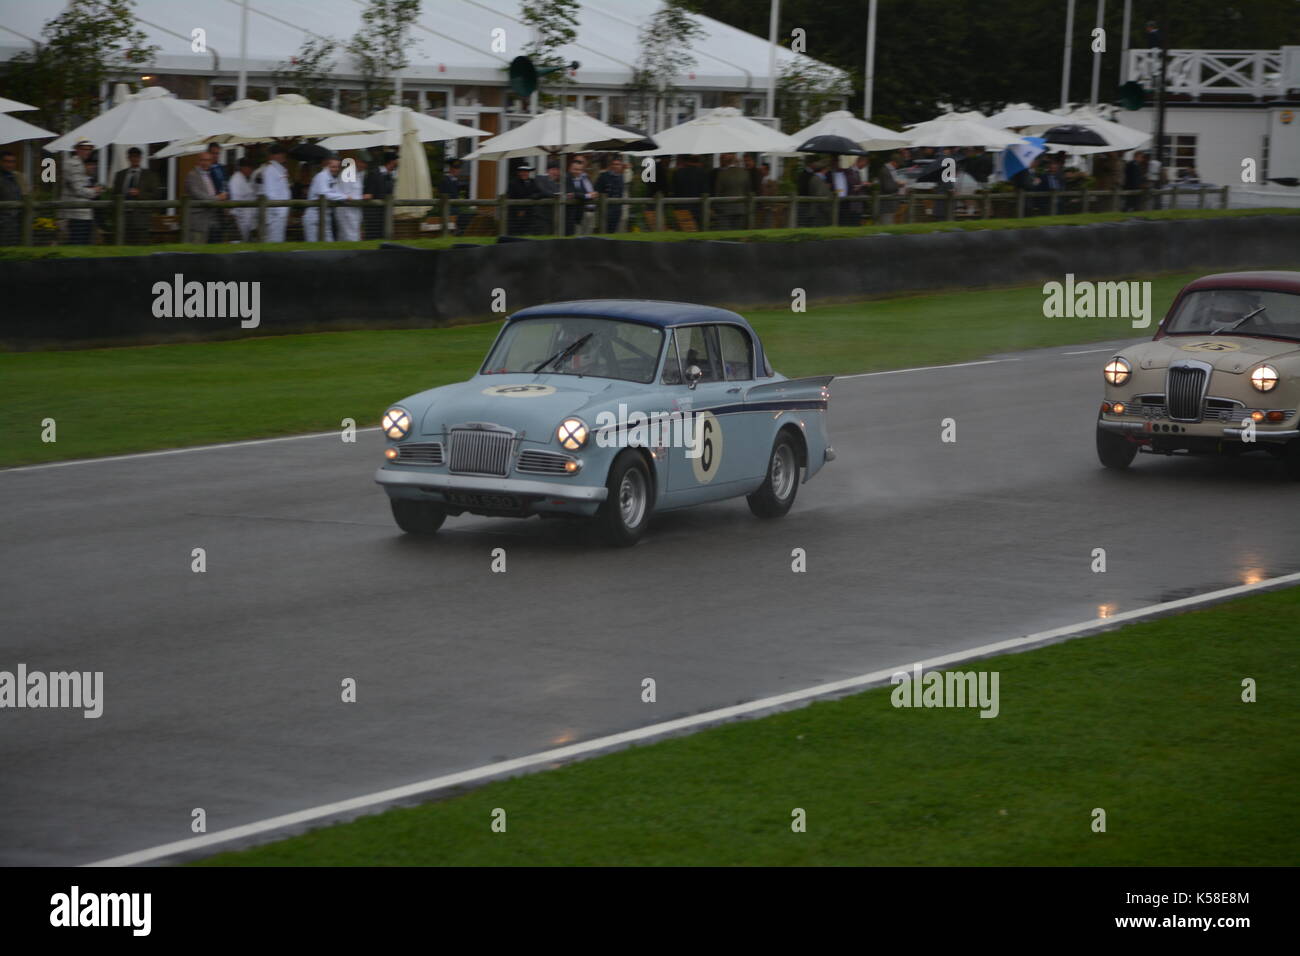 Sunbeam Rapier driven by Chris Harris; St Mary's Trophy; wet condition; Goodwood Revival 8th Sept 2017 Stock Photo